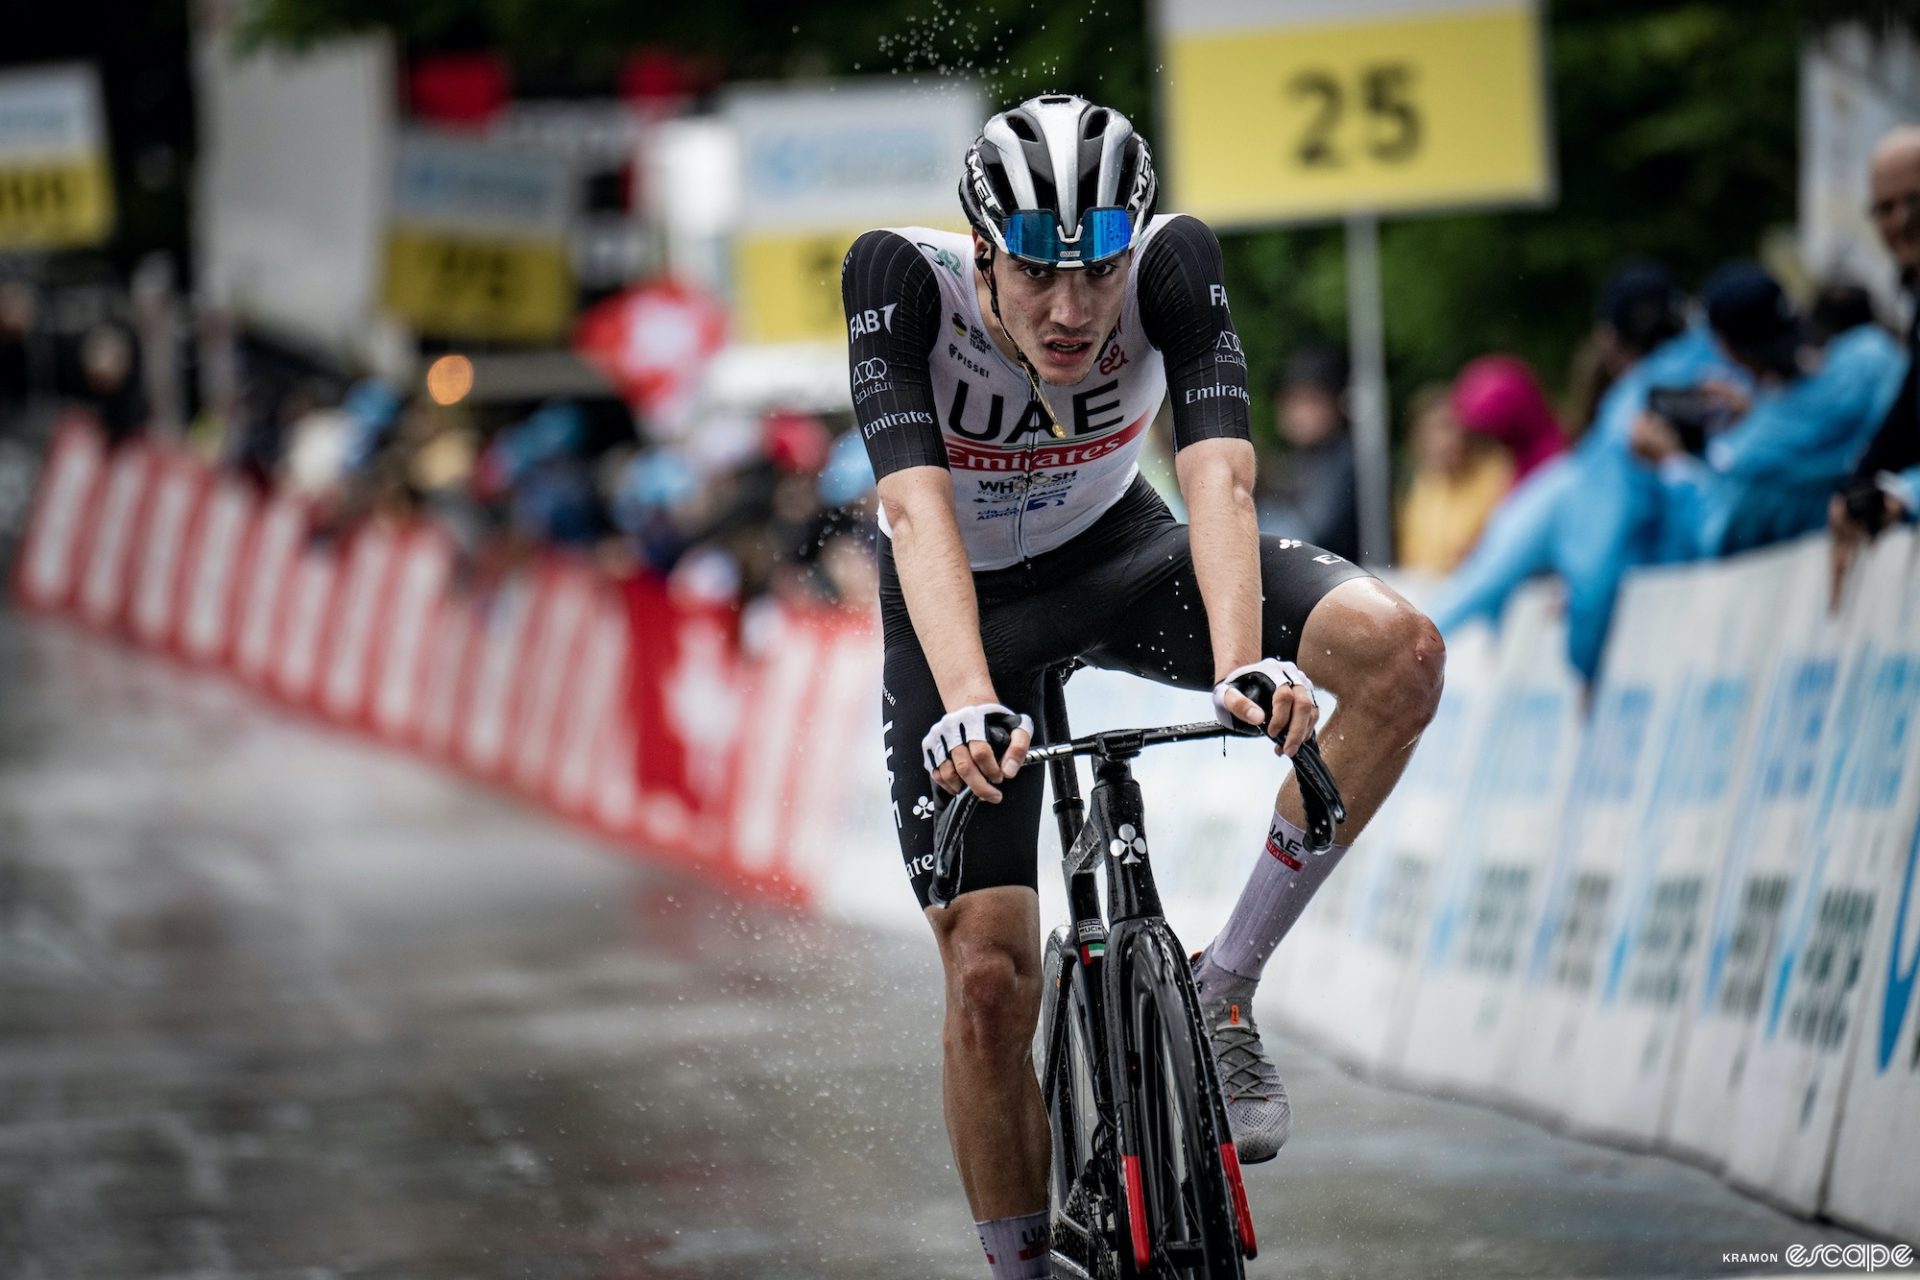 Young Spanish racer Juan Ayuso crosses a rainy finish line alone at the Tour de Suisse, where he won two stages and finished second overall.